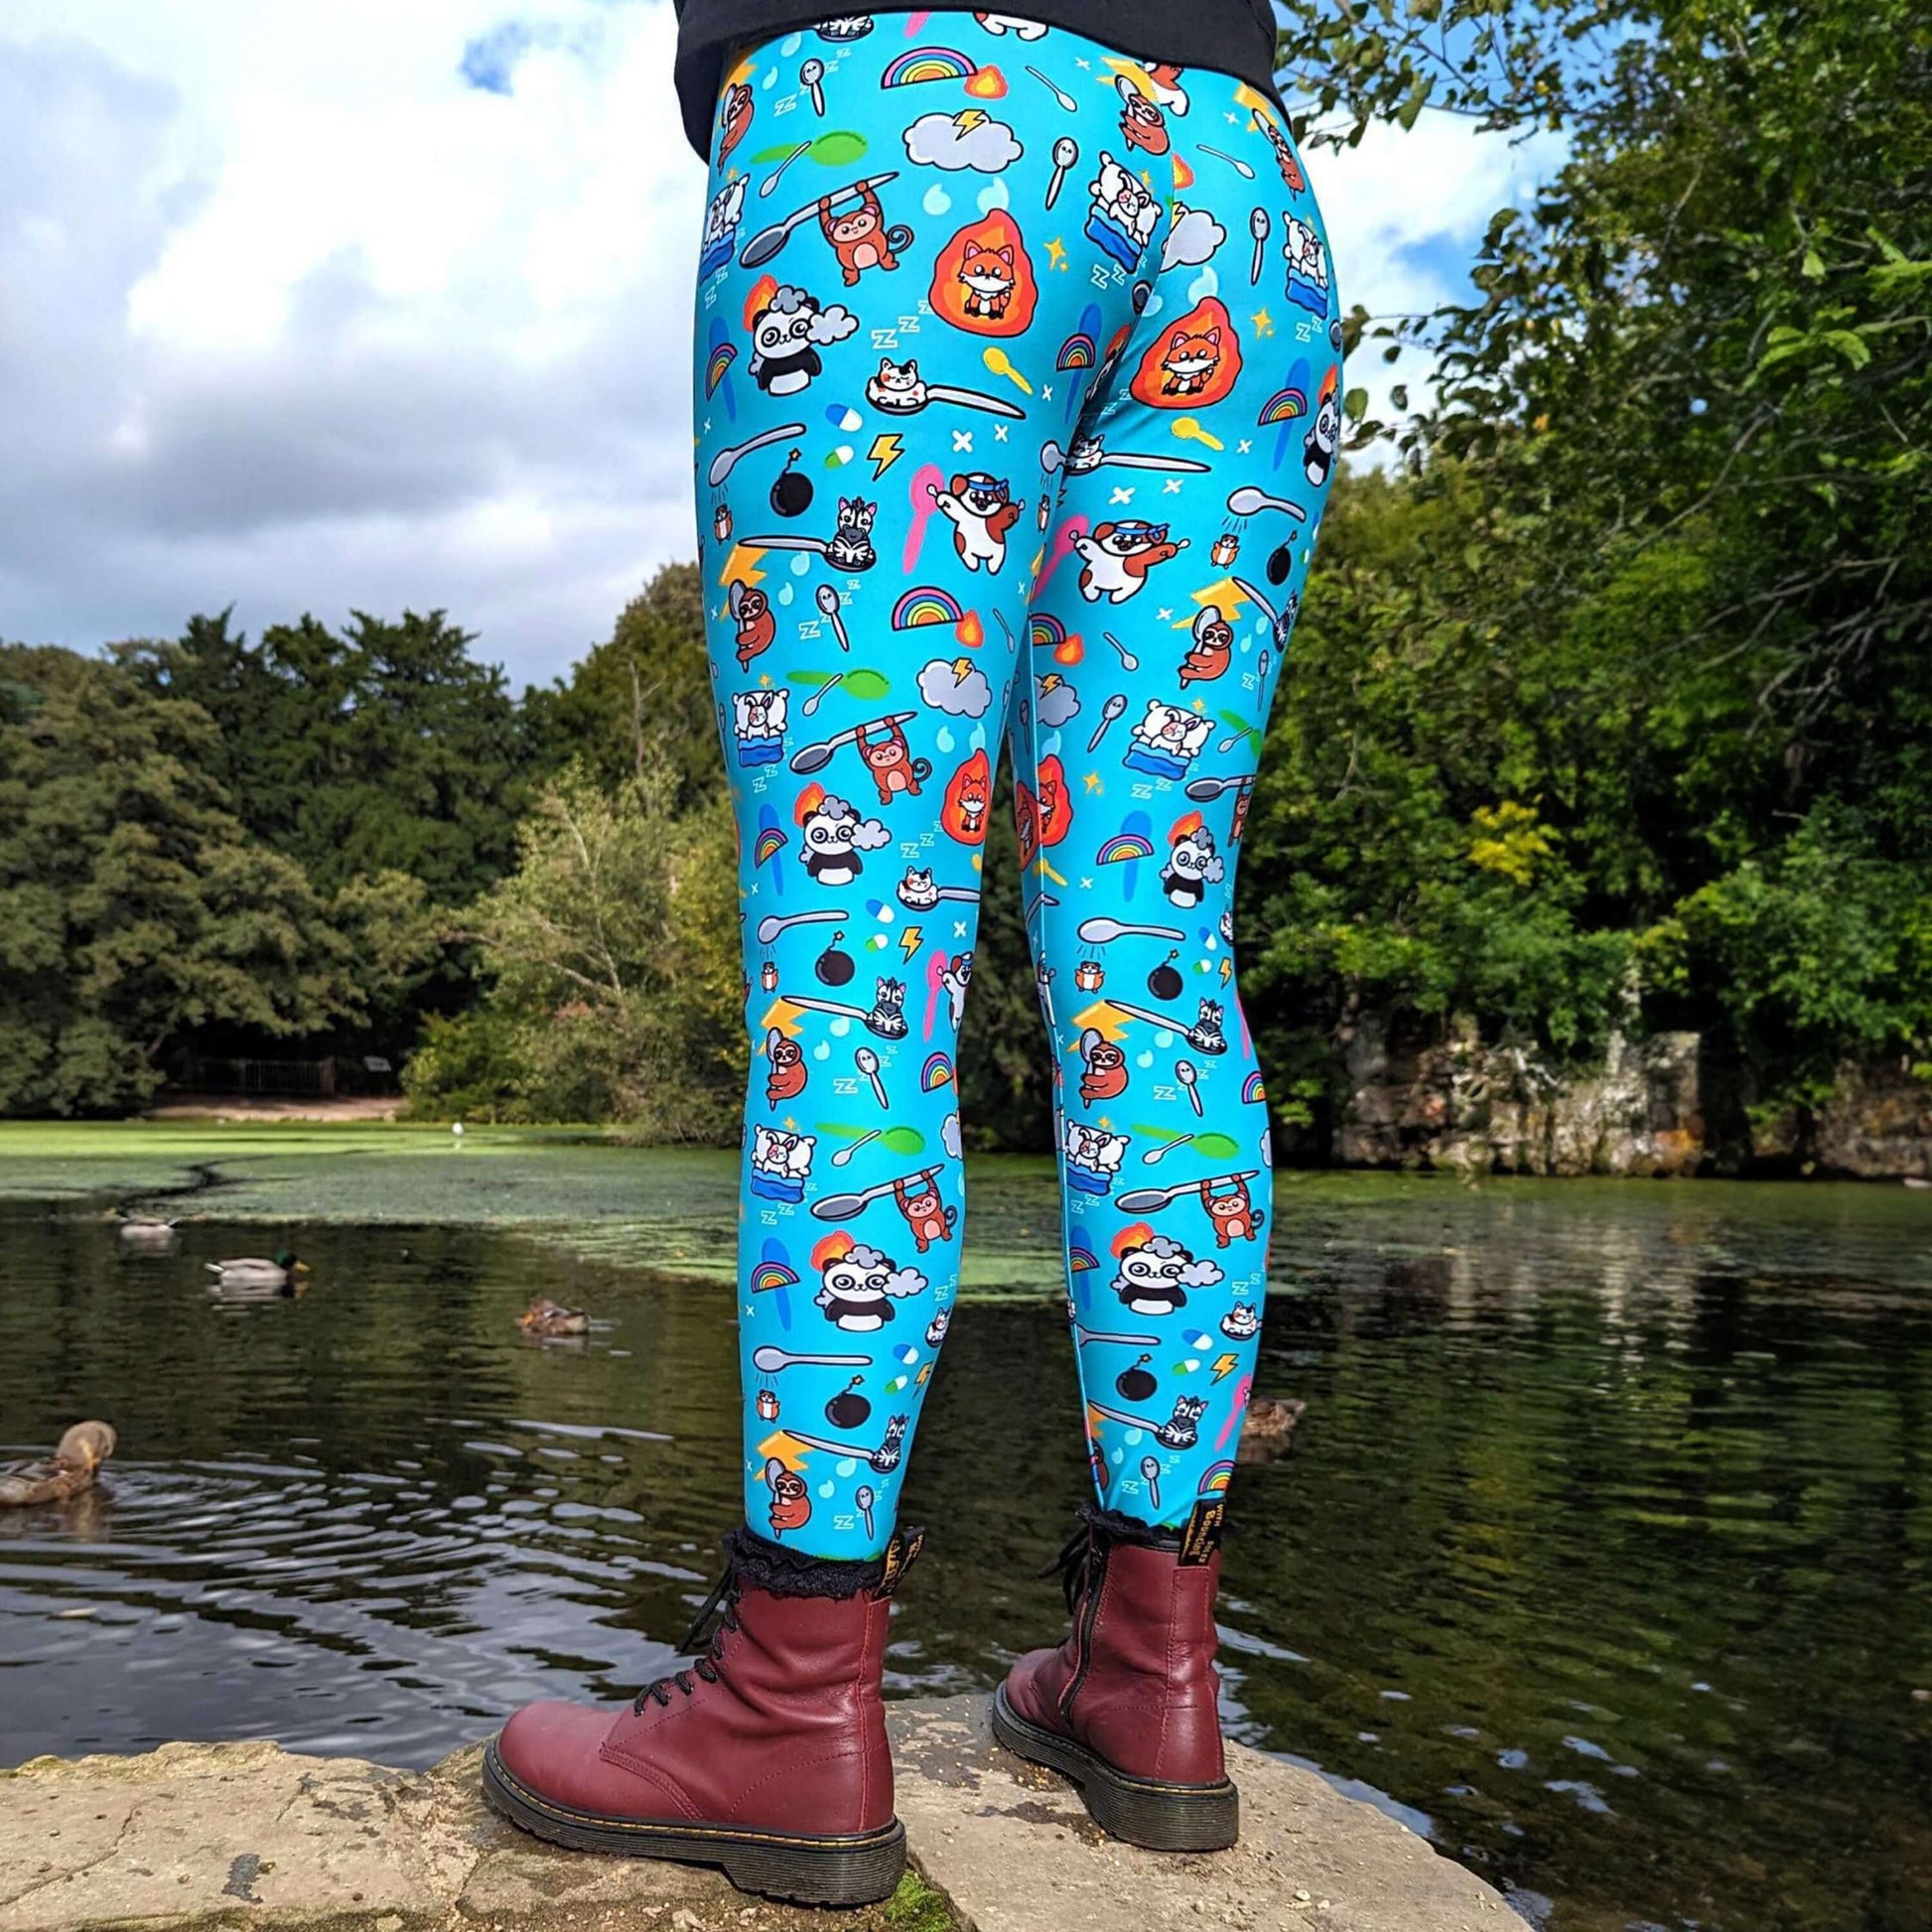 The Spoonie Leggings modelled by Nikky outside in a forest area. She is standing on a rock in front of a lake wearing the spoonie leggings with red dr martens and black invisible illness club ghostie jumper. The blue leggings feature various invisible illness themed animals, rainbows, spoons, sparkles, flames, pills and lightning bolts. Raising awareness for hidden disabilities.